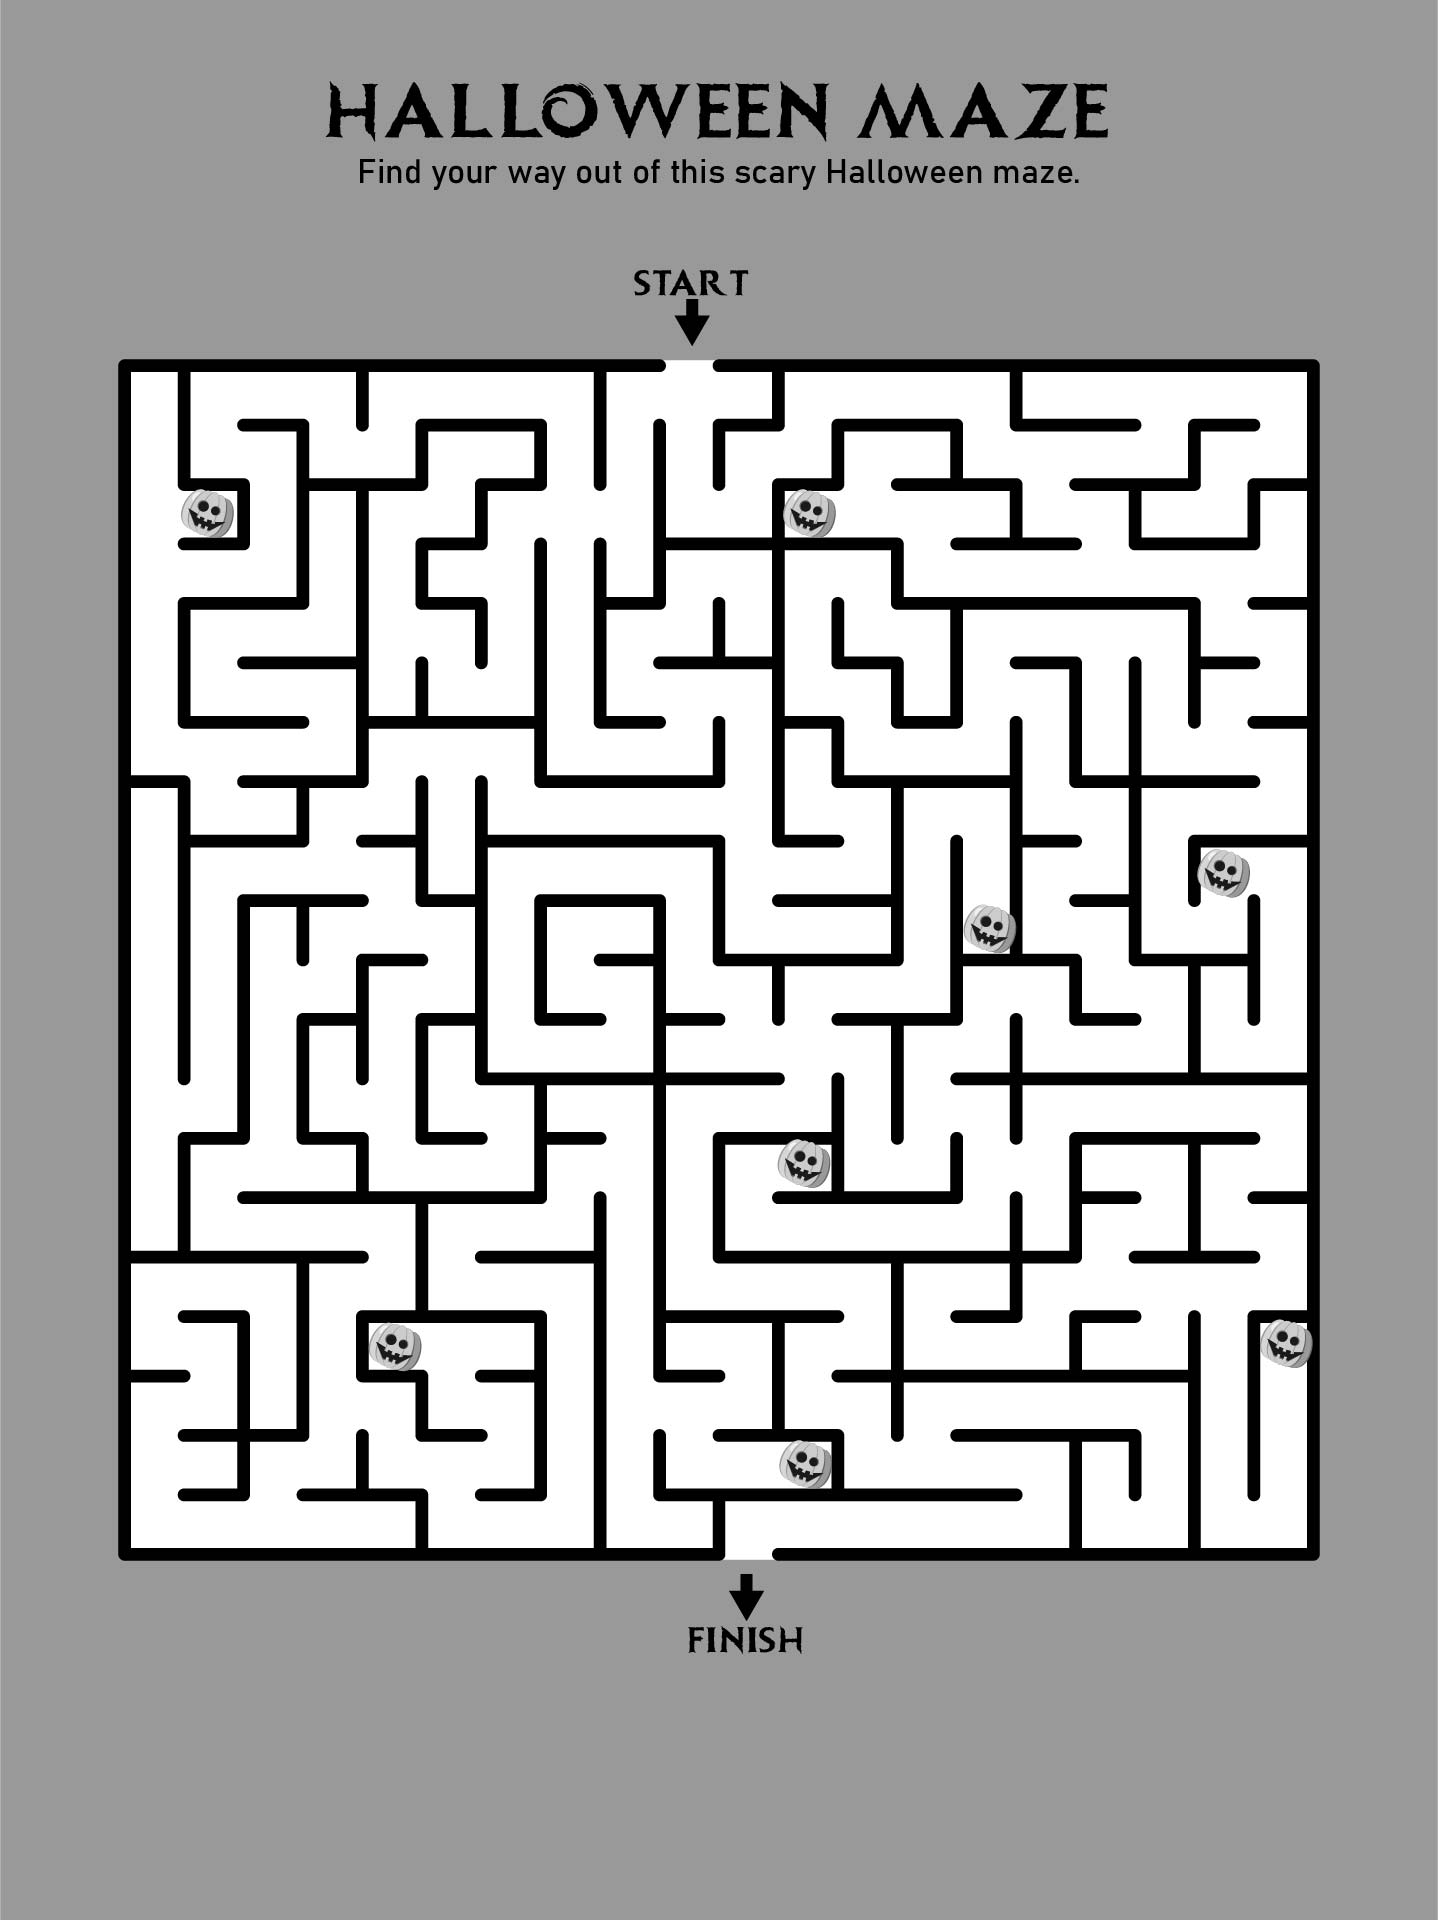 15-best-scary-halloween-mazes-printable-for-free-at-printablee